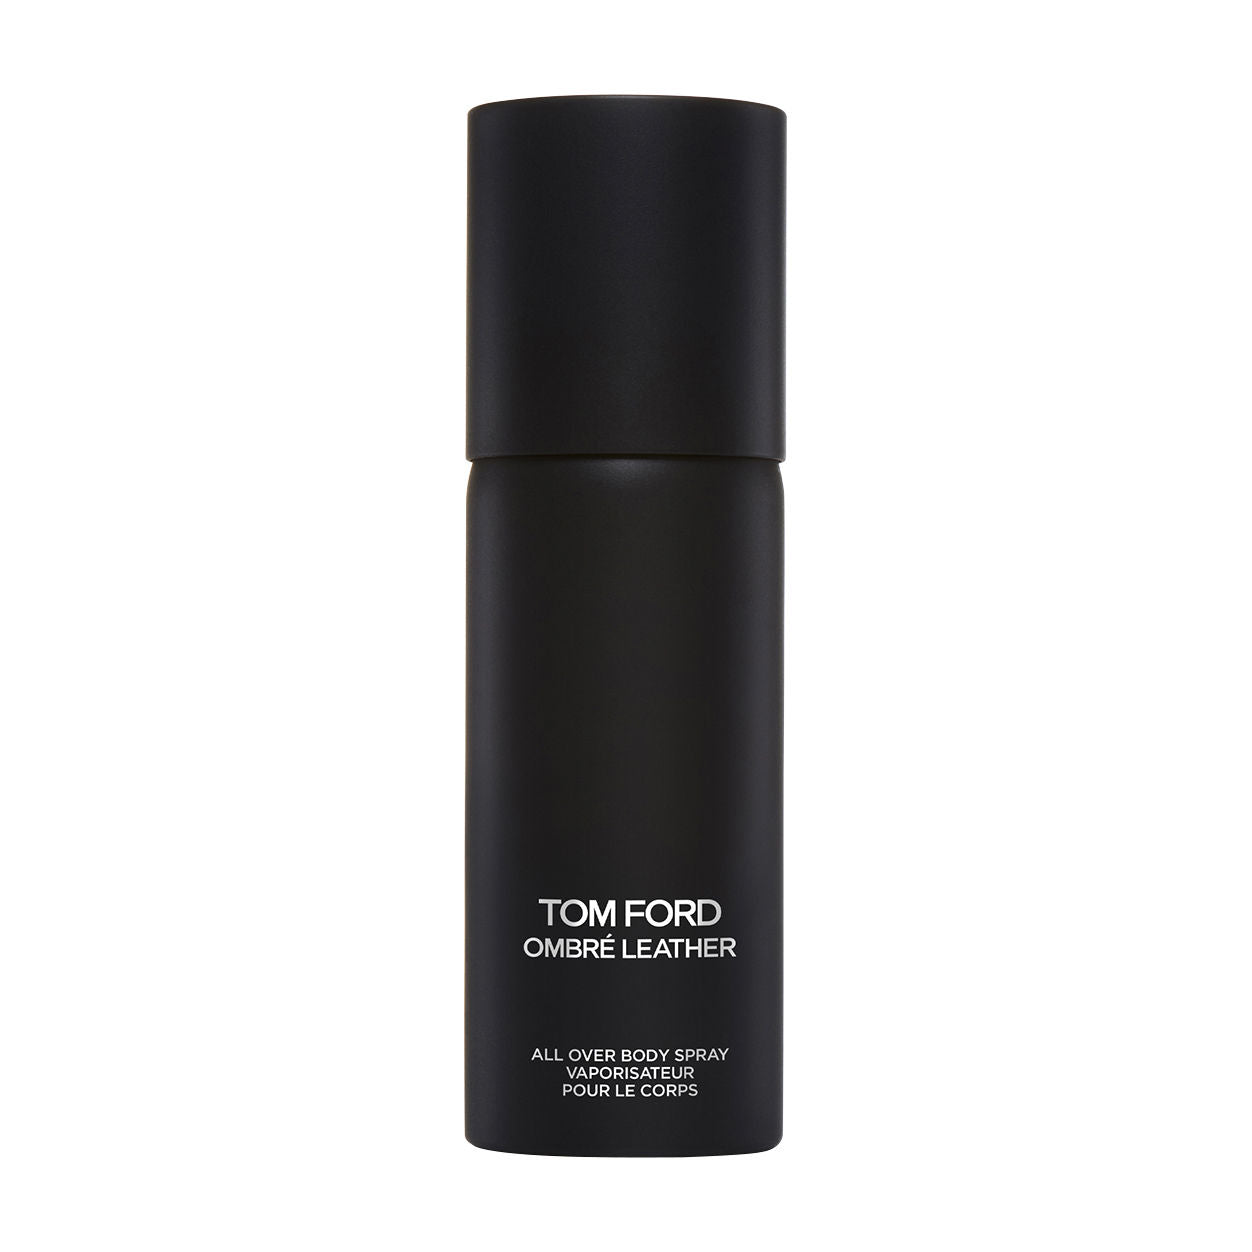 Tom Ford Ombre Leather All Over Body Spray main image